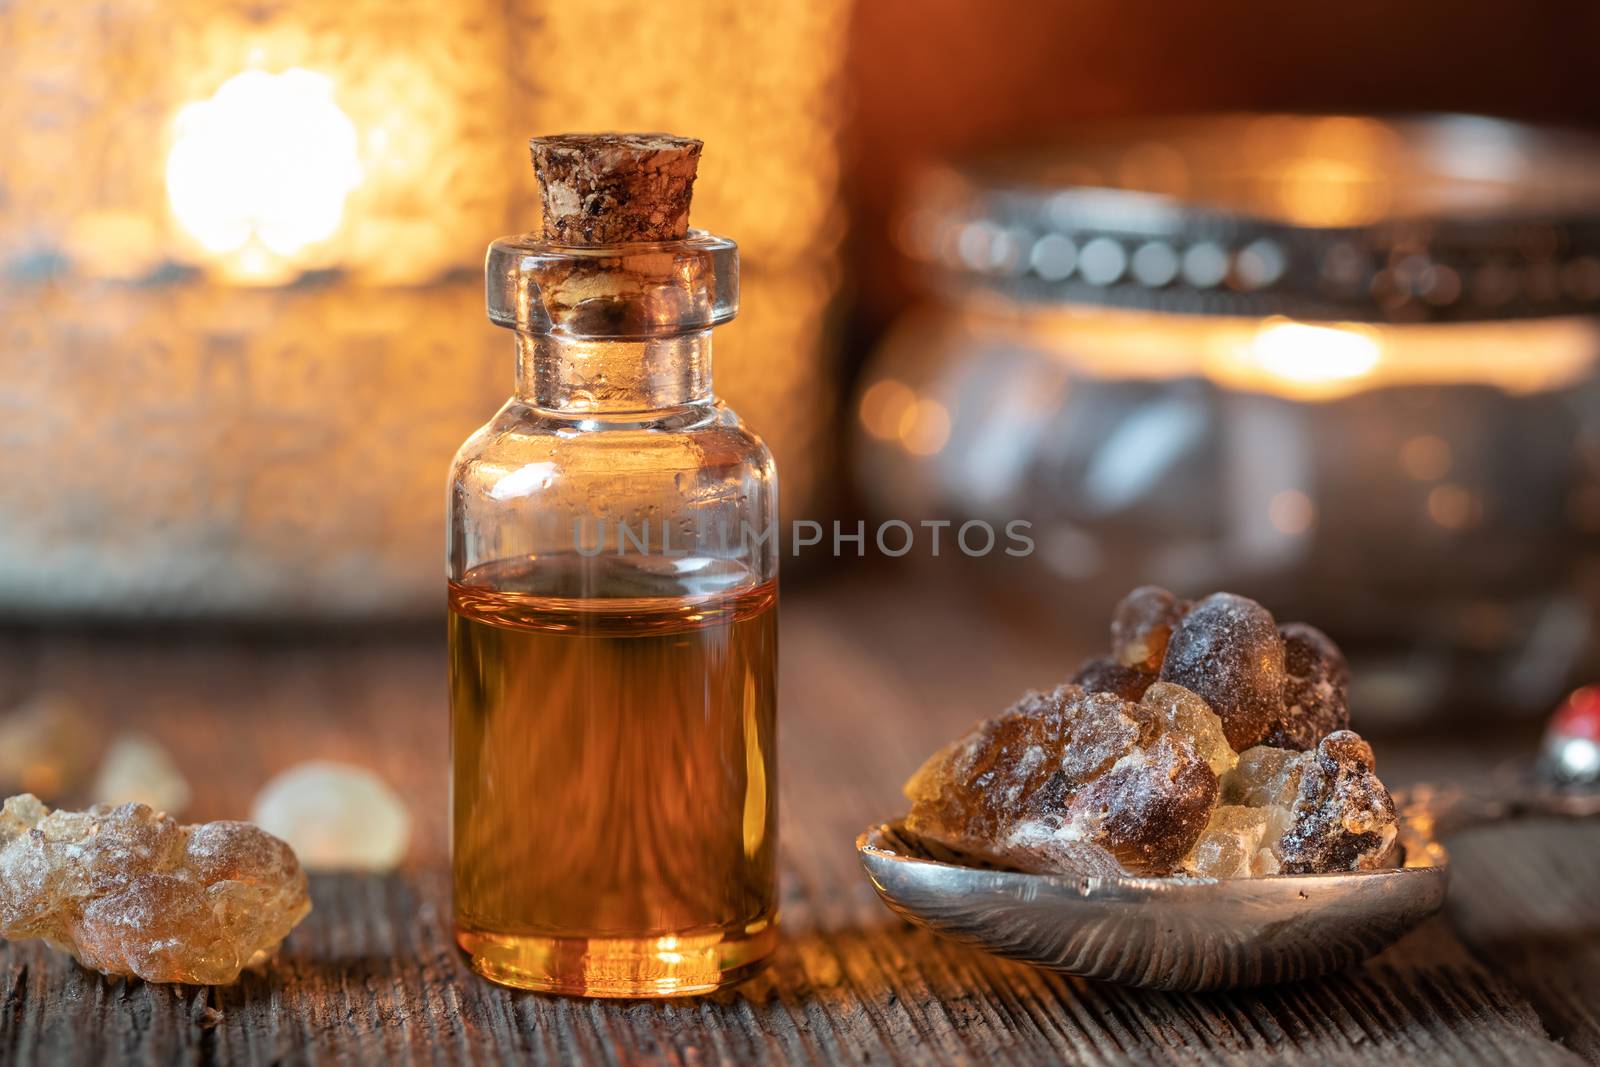 A bottle of frankincense essential oil with frankincense resin c by madeleine_steinbach